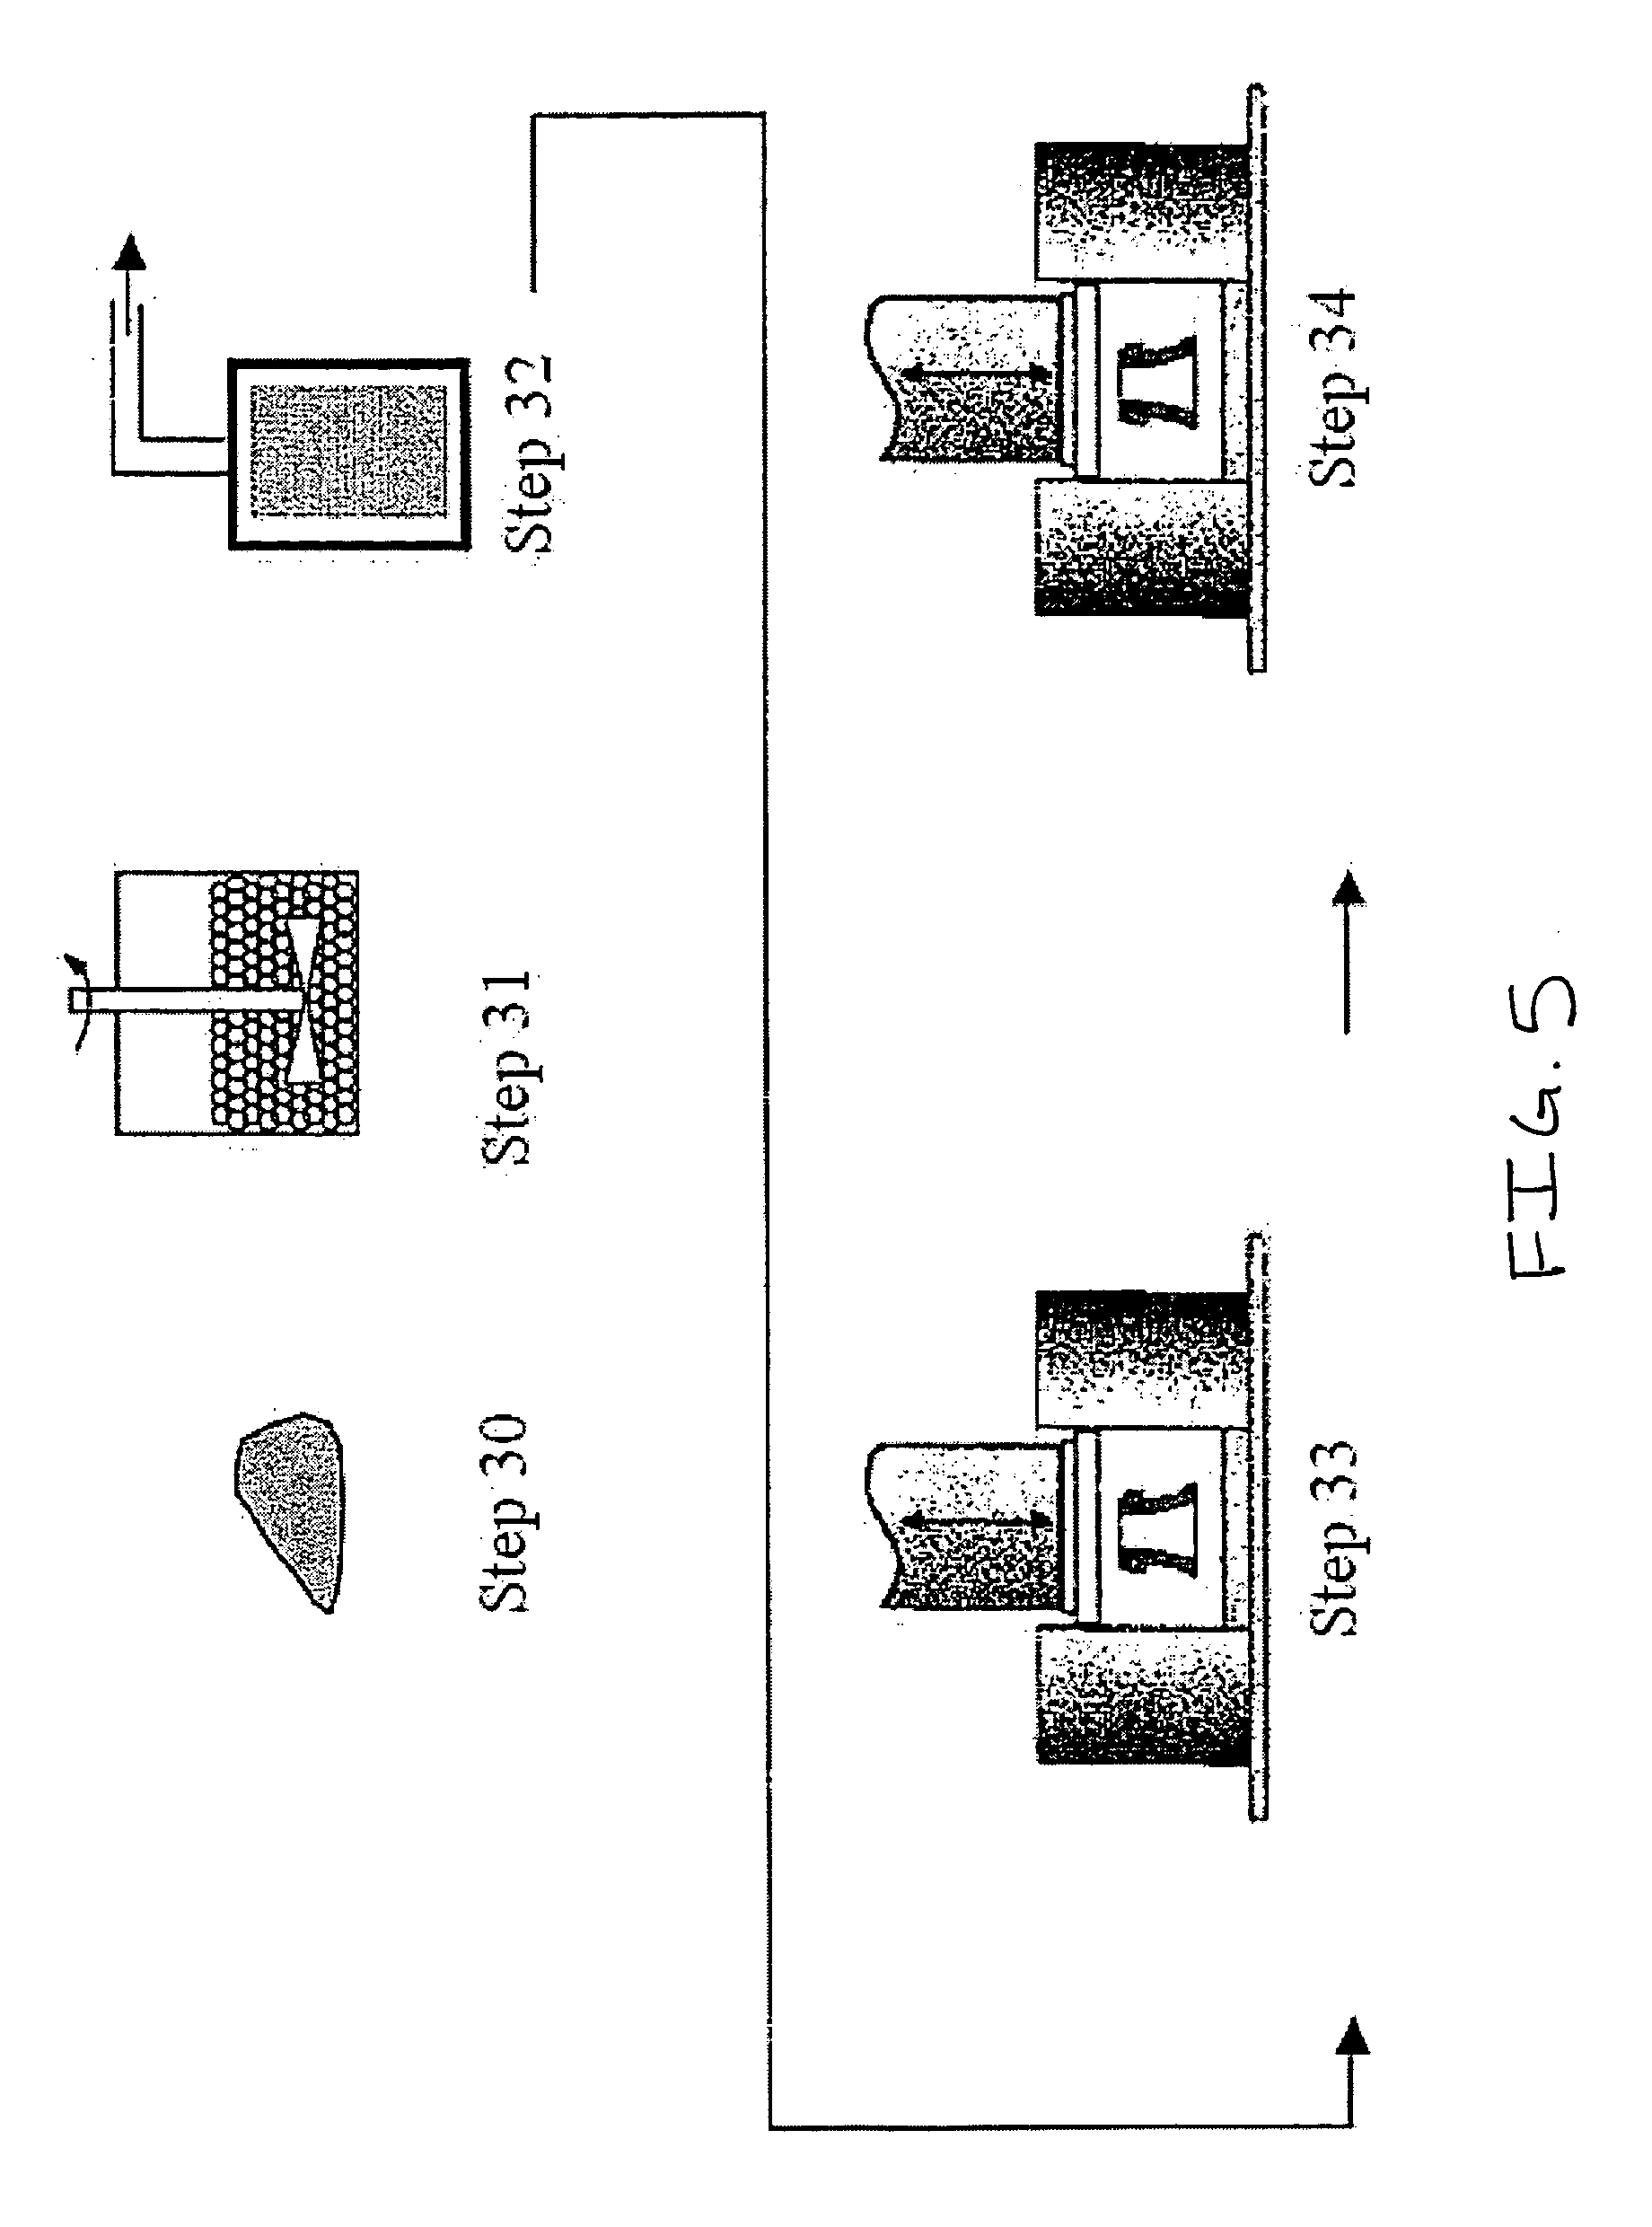 Method for improving the ductility of high-strength nanophase alloys